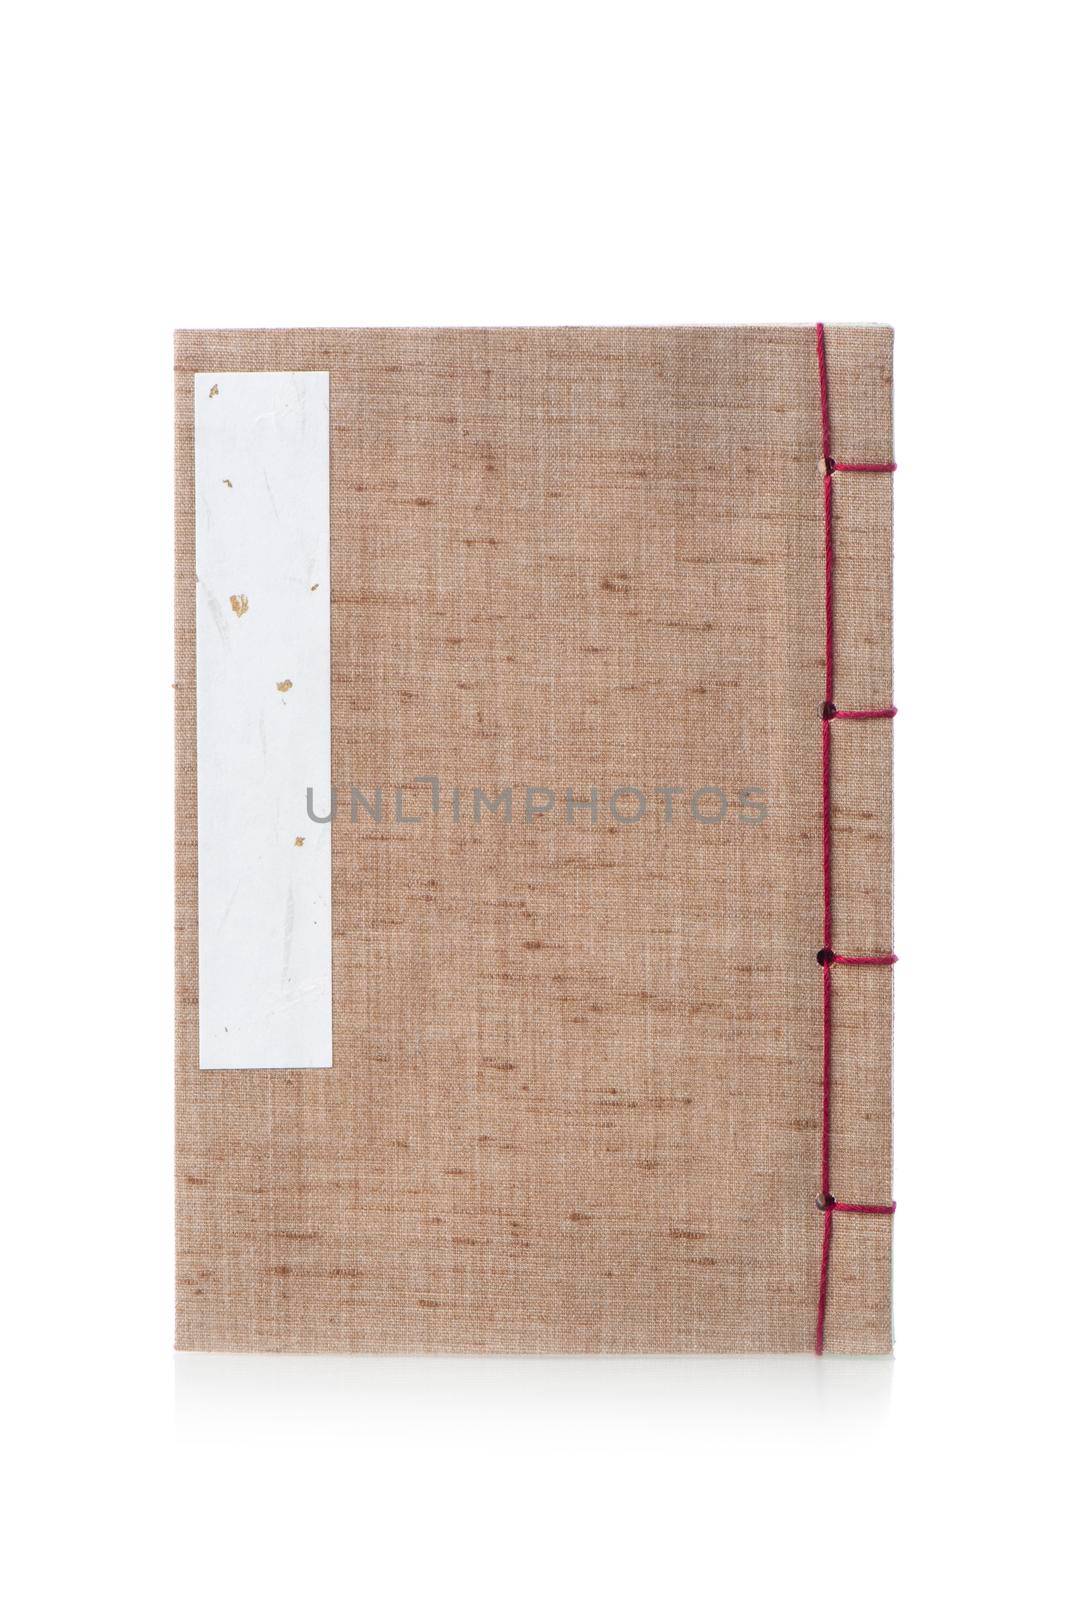 vintage style of Japanese stab binding isolated over white background